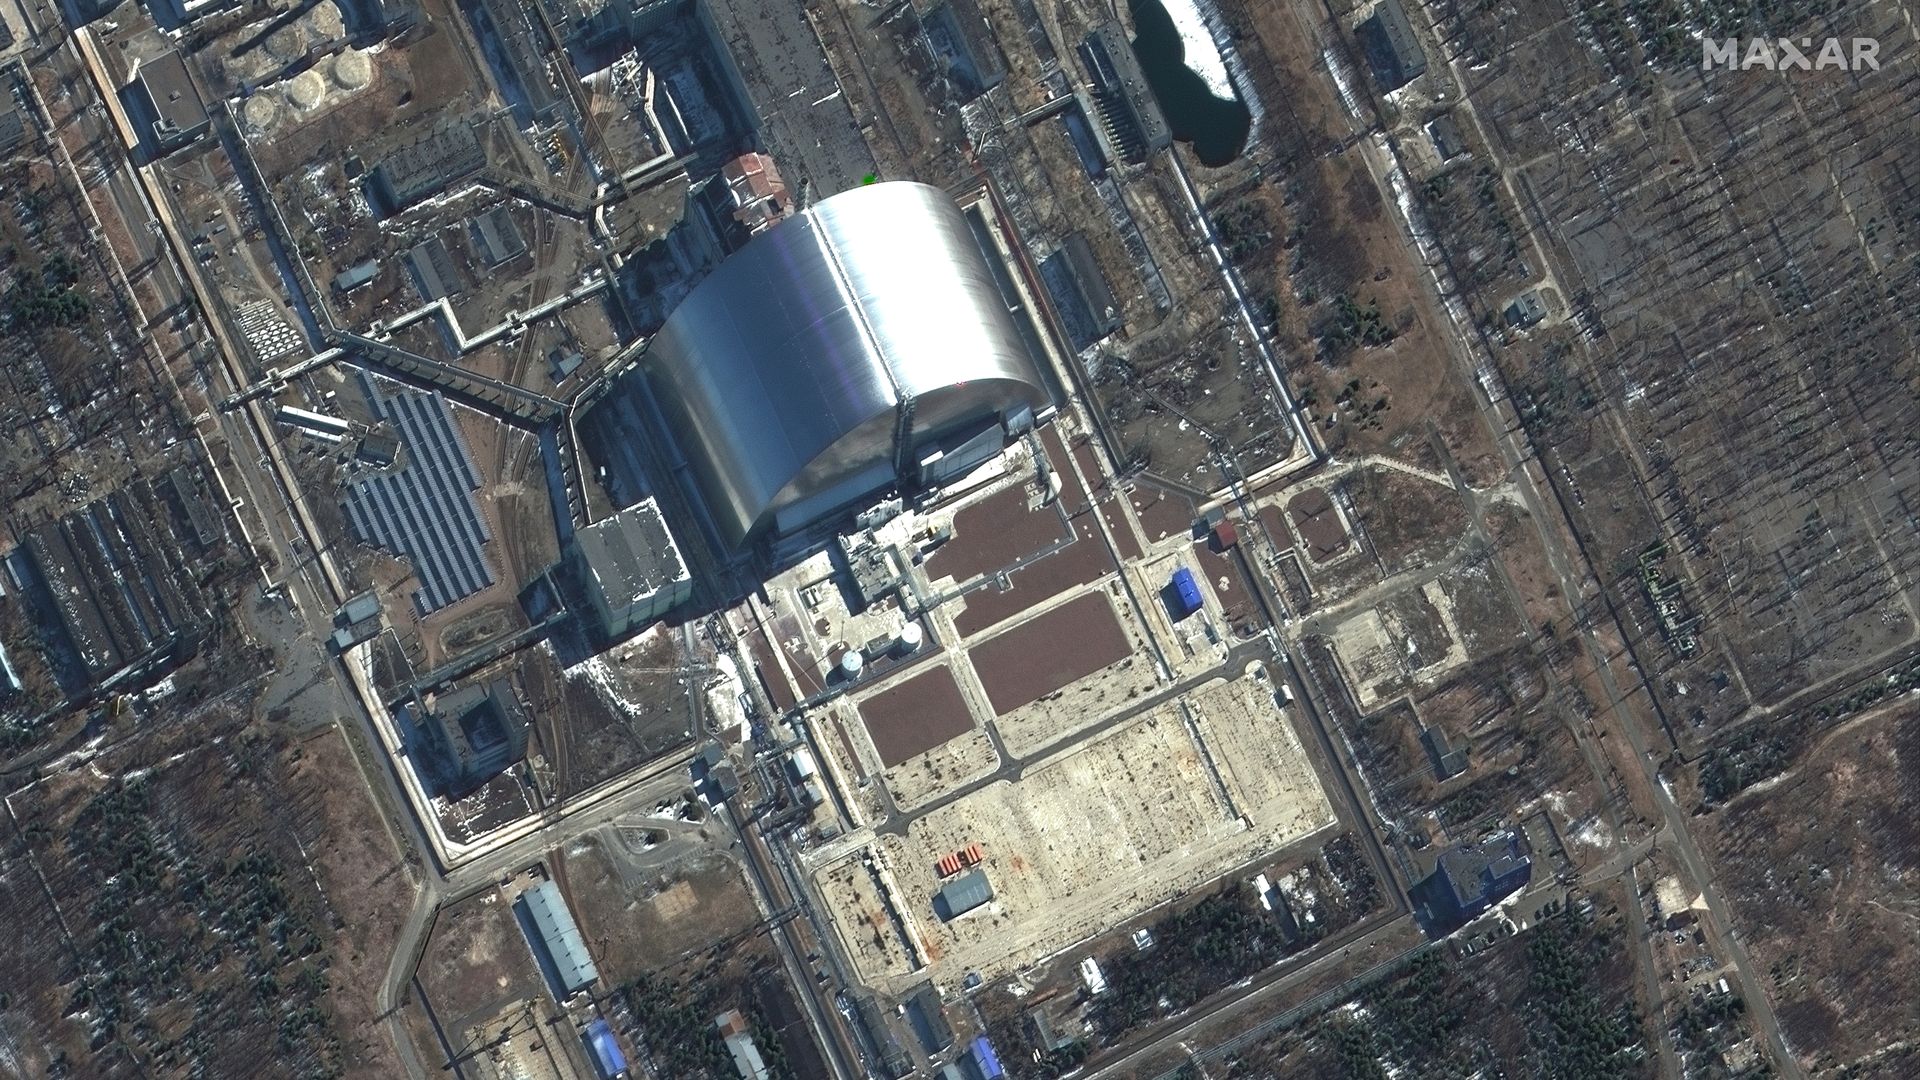 Satellite image of the Chernobyl nuclear station from above